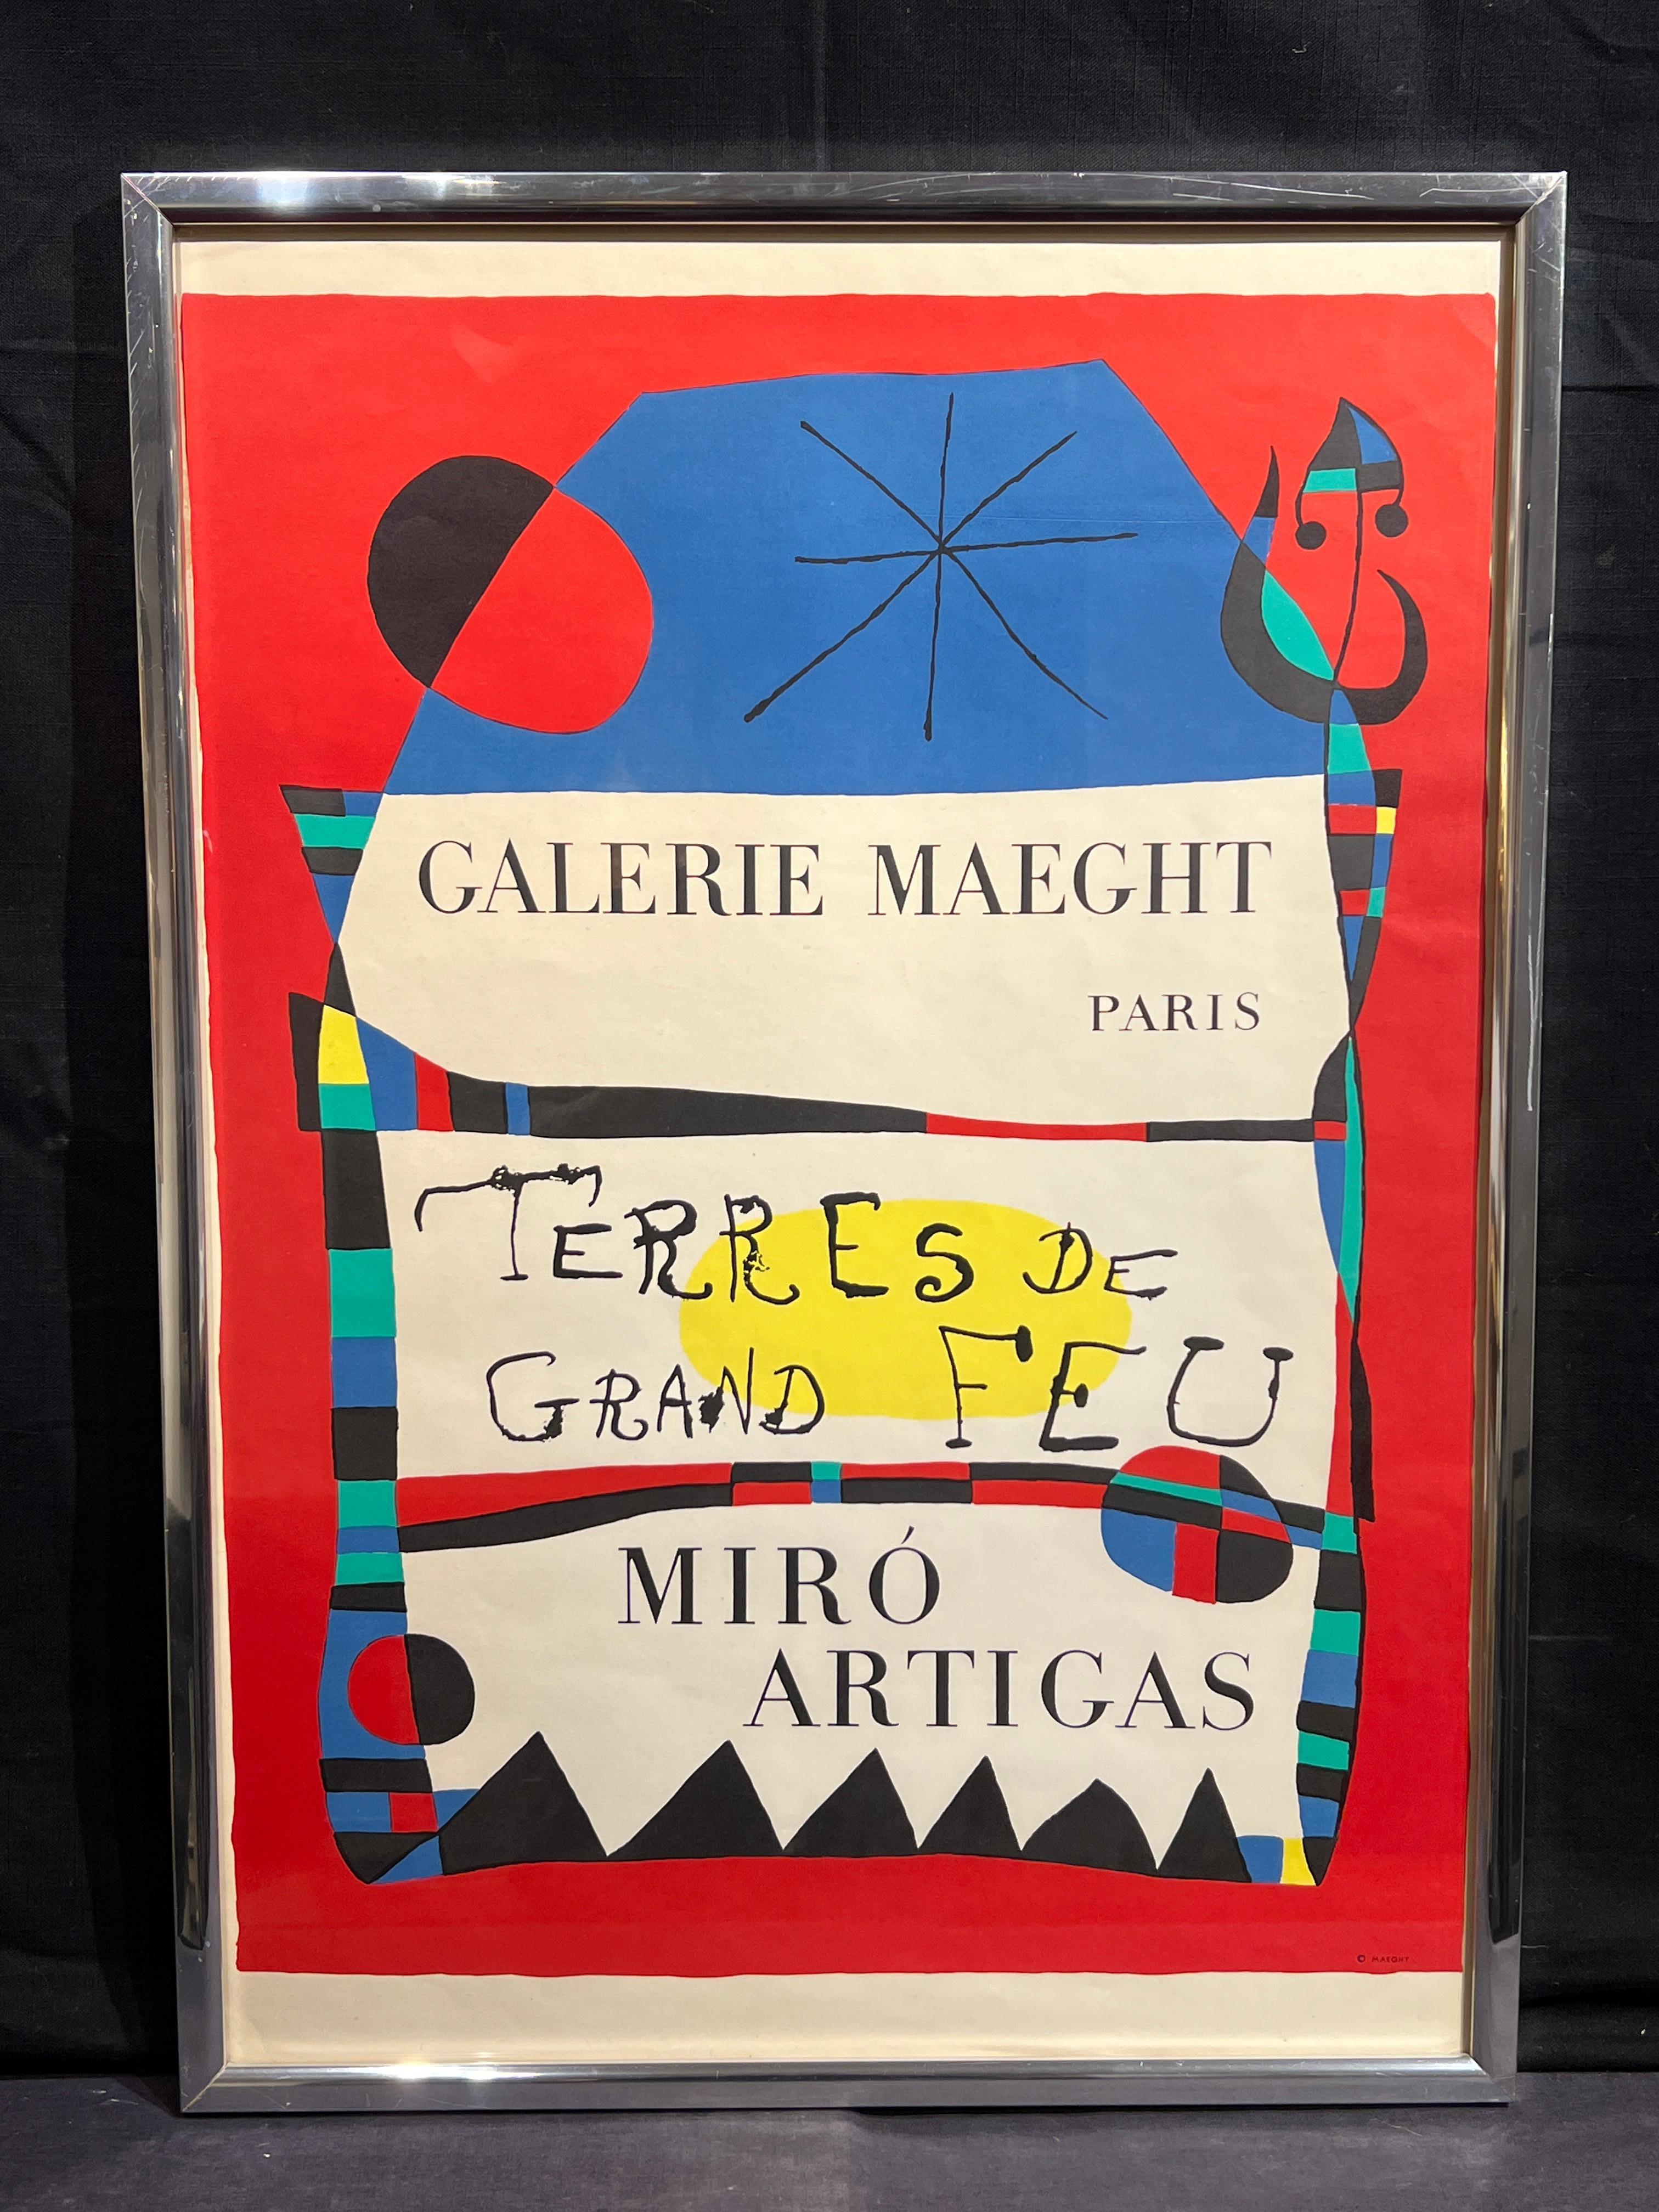 Terres de Grand Feu
Miro Artigas
Galerie Maeght Fine Art Poster Print
30 x 21 inches
31 x 22 inches with frame

Joan Miro (Spanish, 1893-1983)

Joan Miro was born in Barcelona, Spain on April 20, 1893, the son of a watchmaker. From 1912 he studied